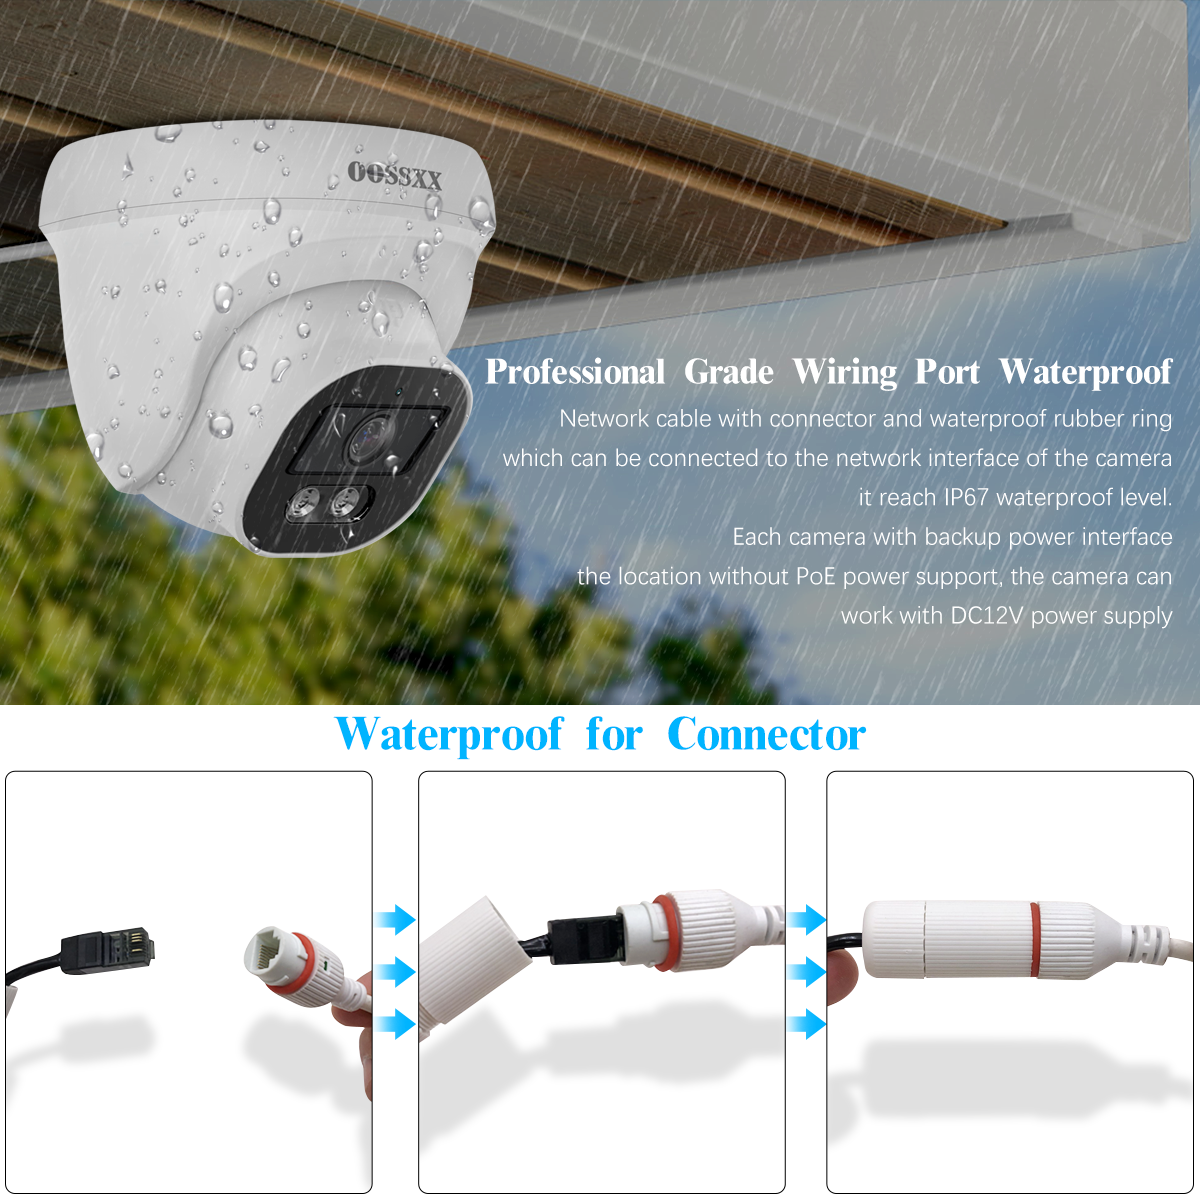 4K/8.0 Megapixel & 130° Ultra Wide-AnglePoE Home Security Camera – OOSSXX